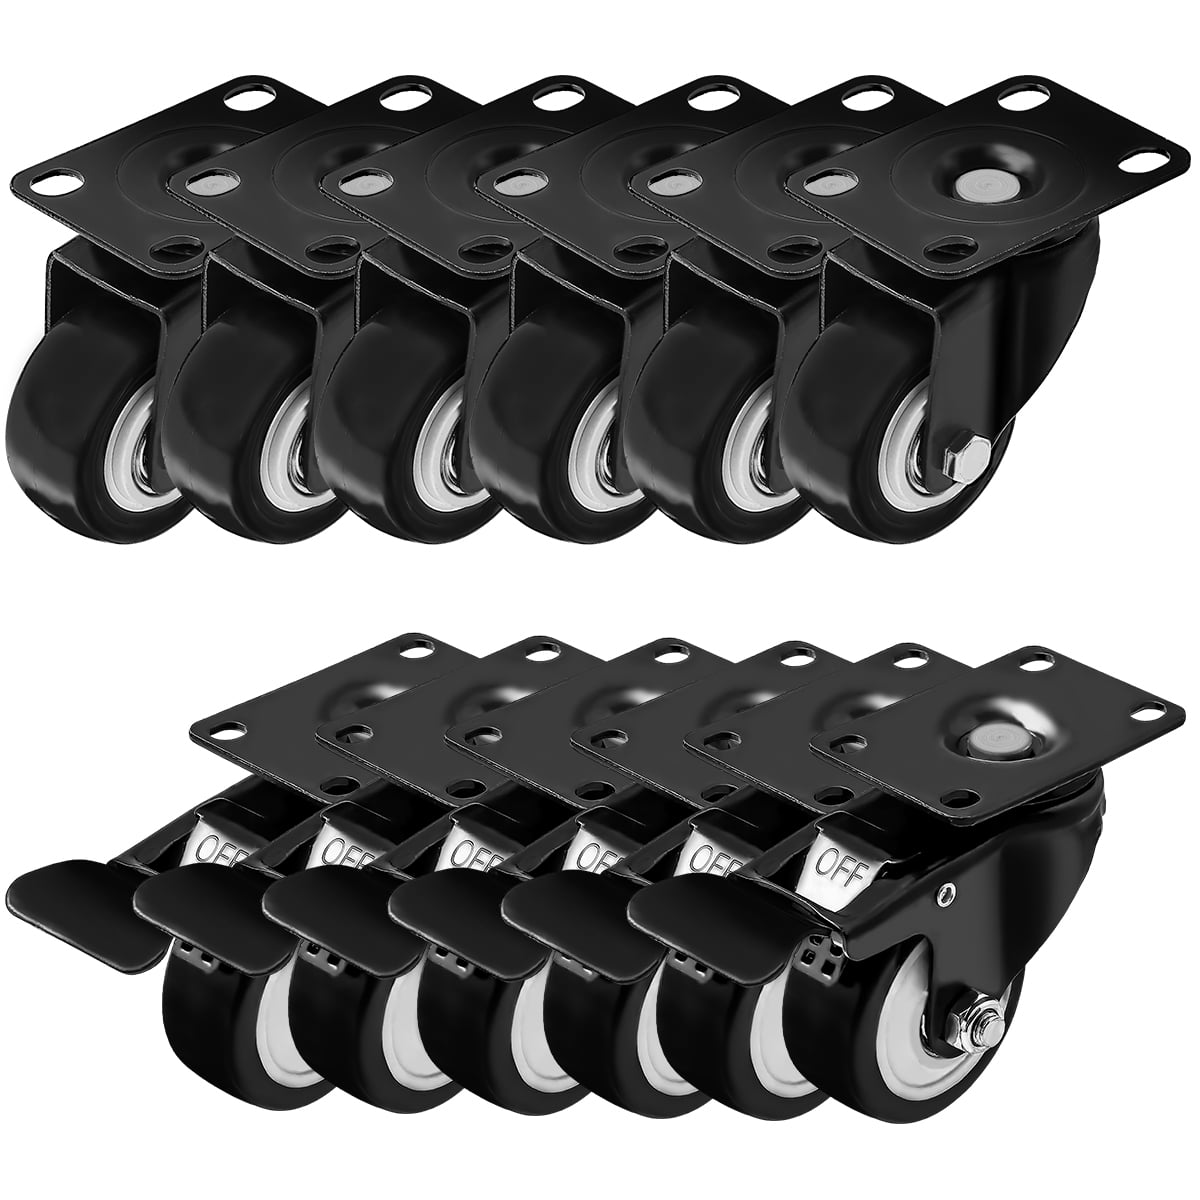 Caster Wheels Rubber Base w/ Top Plate & Bearing 12 Pack 2.5" NO Brake 